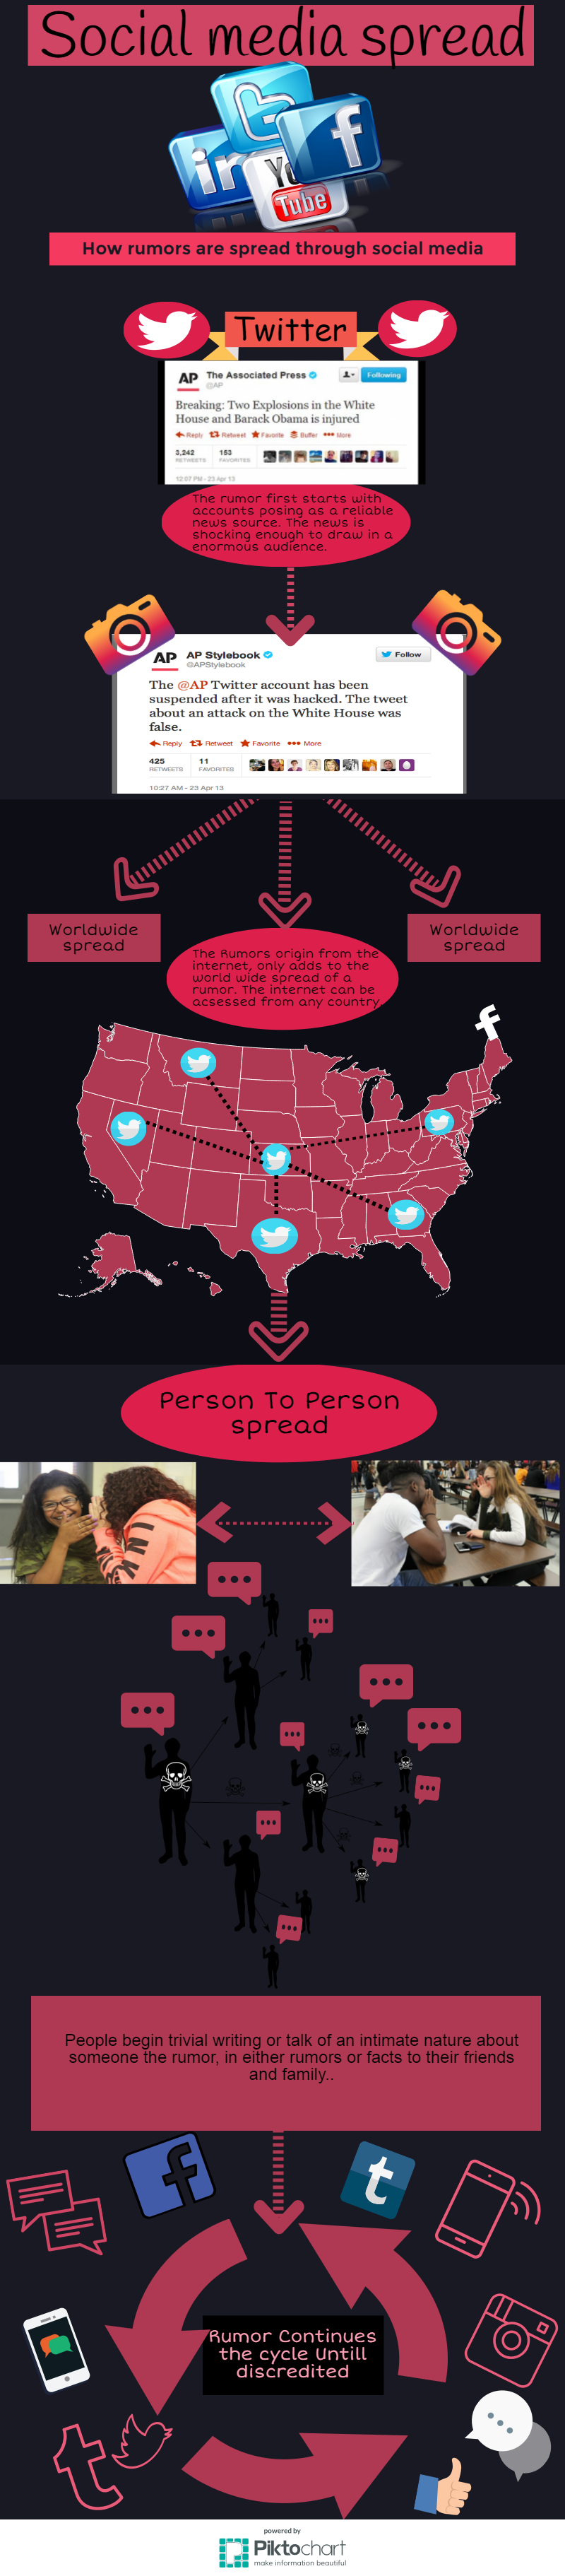 A graphic depicts the spread of a rumor. Social media such as Twitter, Instagram, Tumblr, and Facebook encourage gossip through deceptive accounts that contribute to the worldwide spread that occurs soon after. Person-to-person spread only adds to the rumor’s speed. 